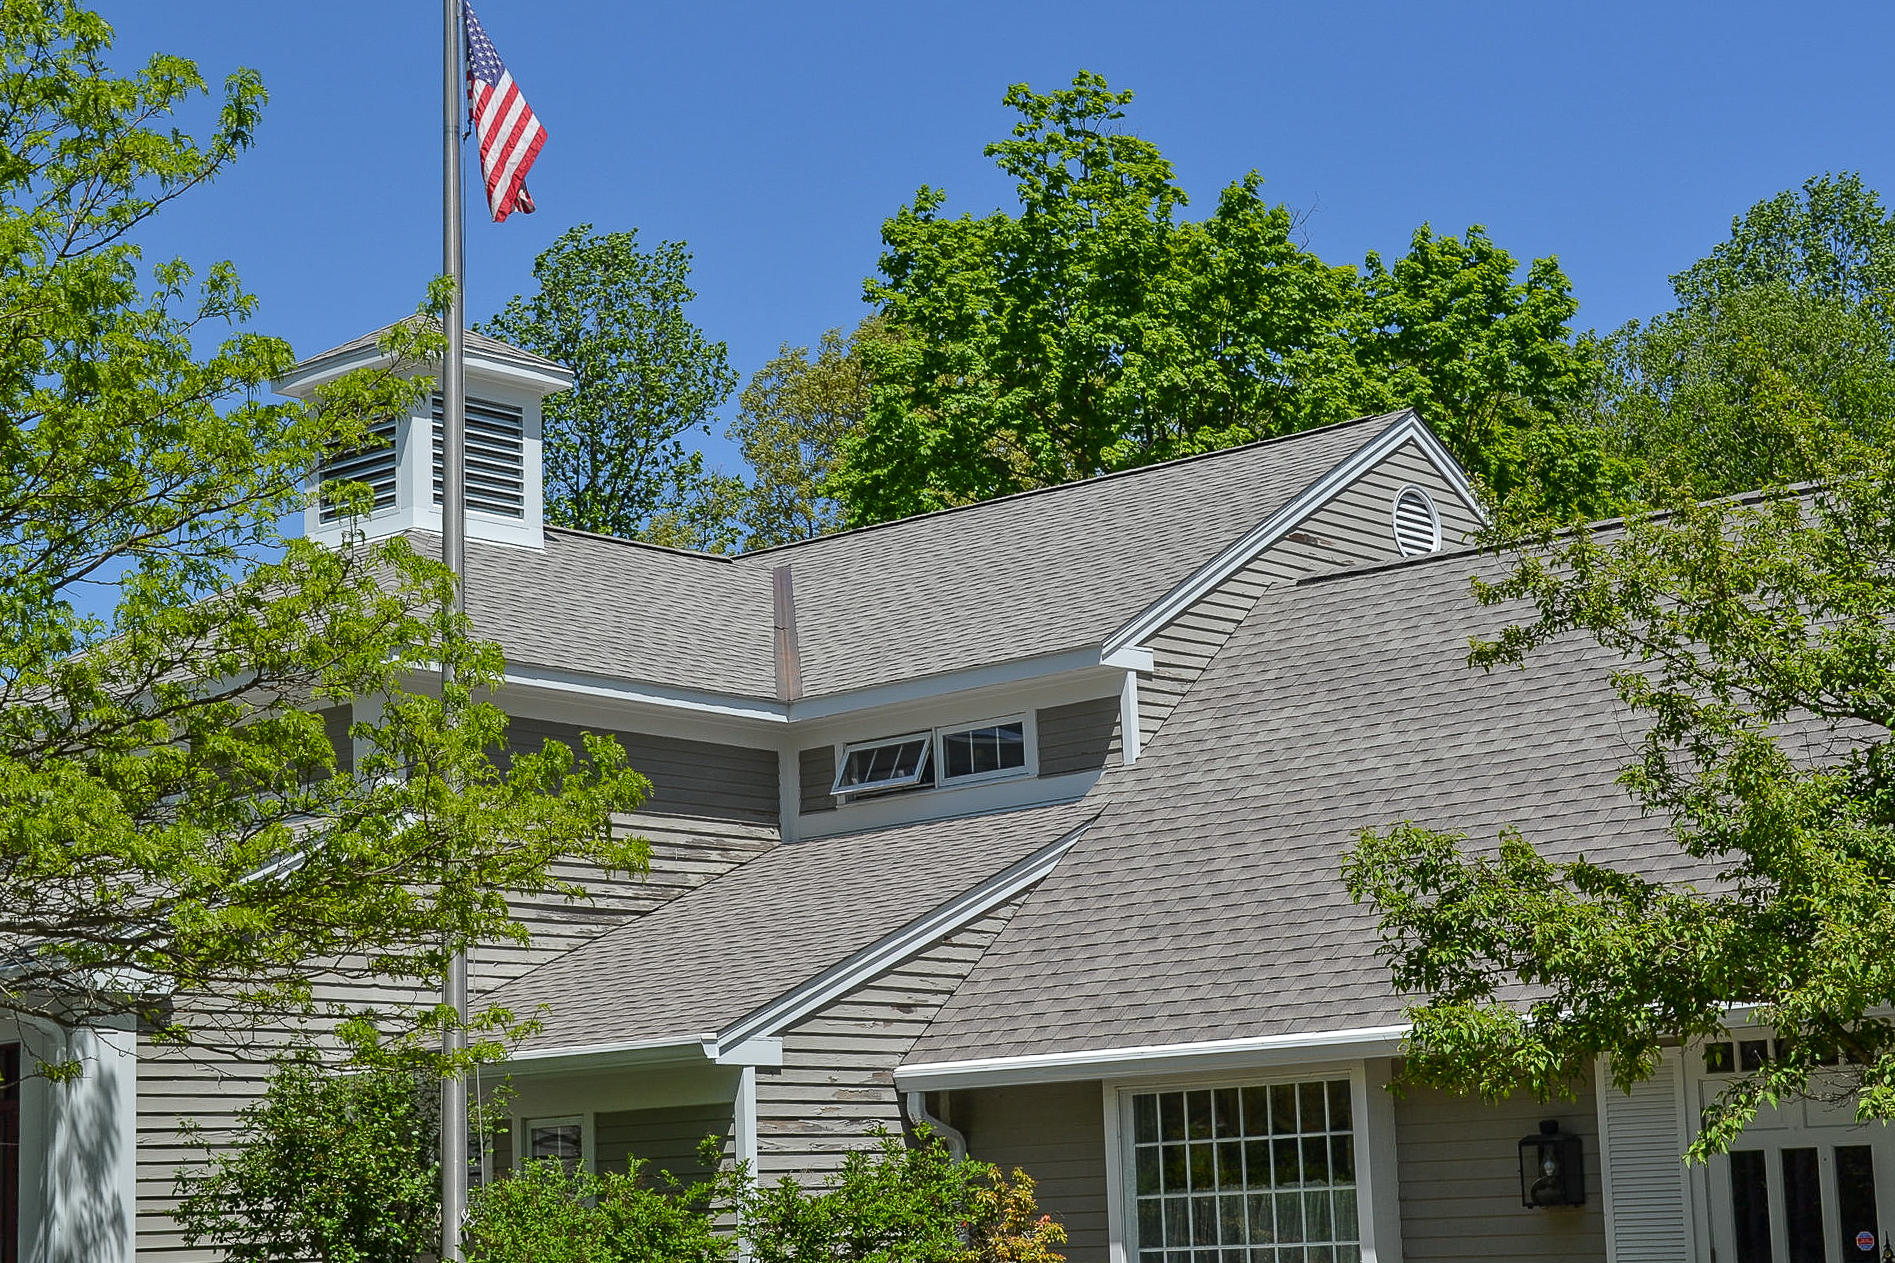 Cool Series GAF Timberline Architectural Shingles for Killingworth Town Library